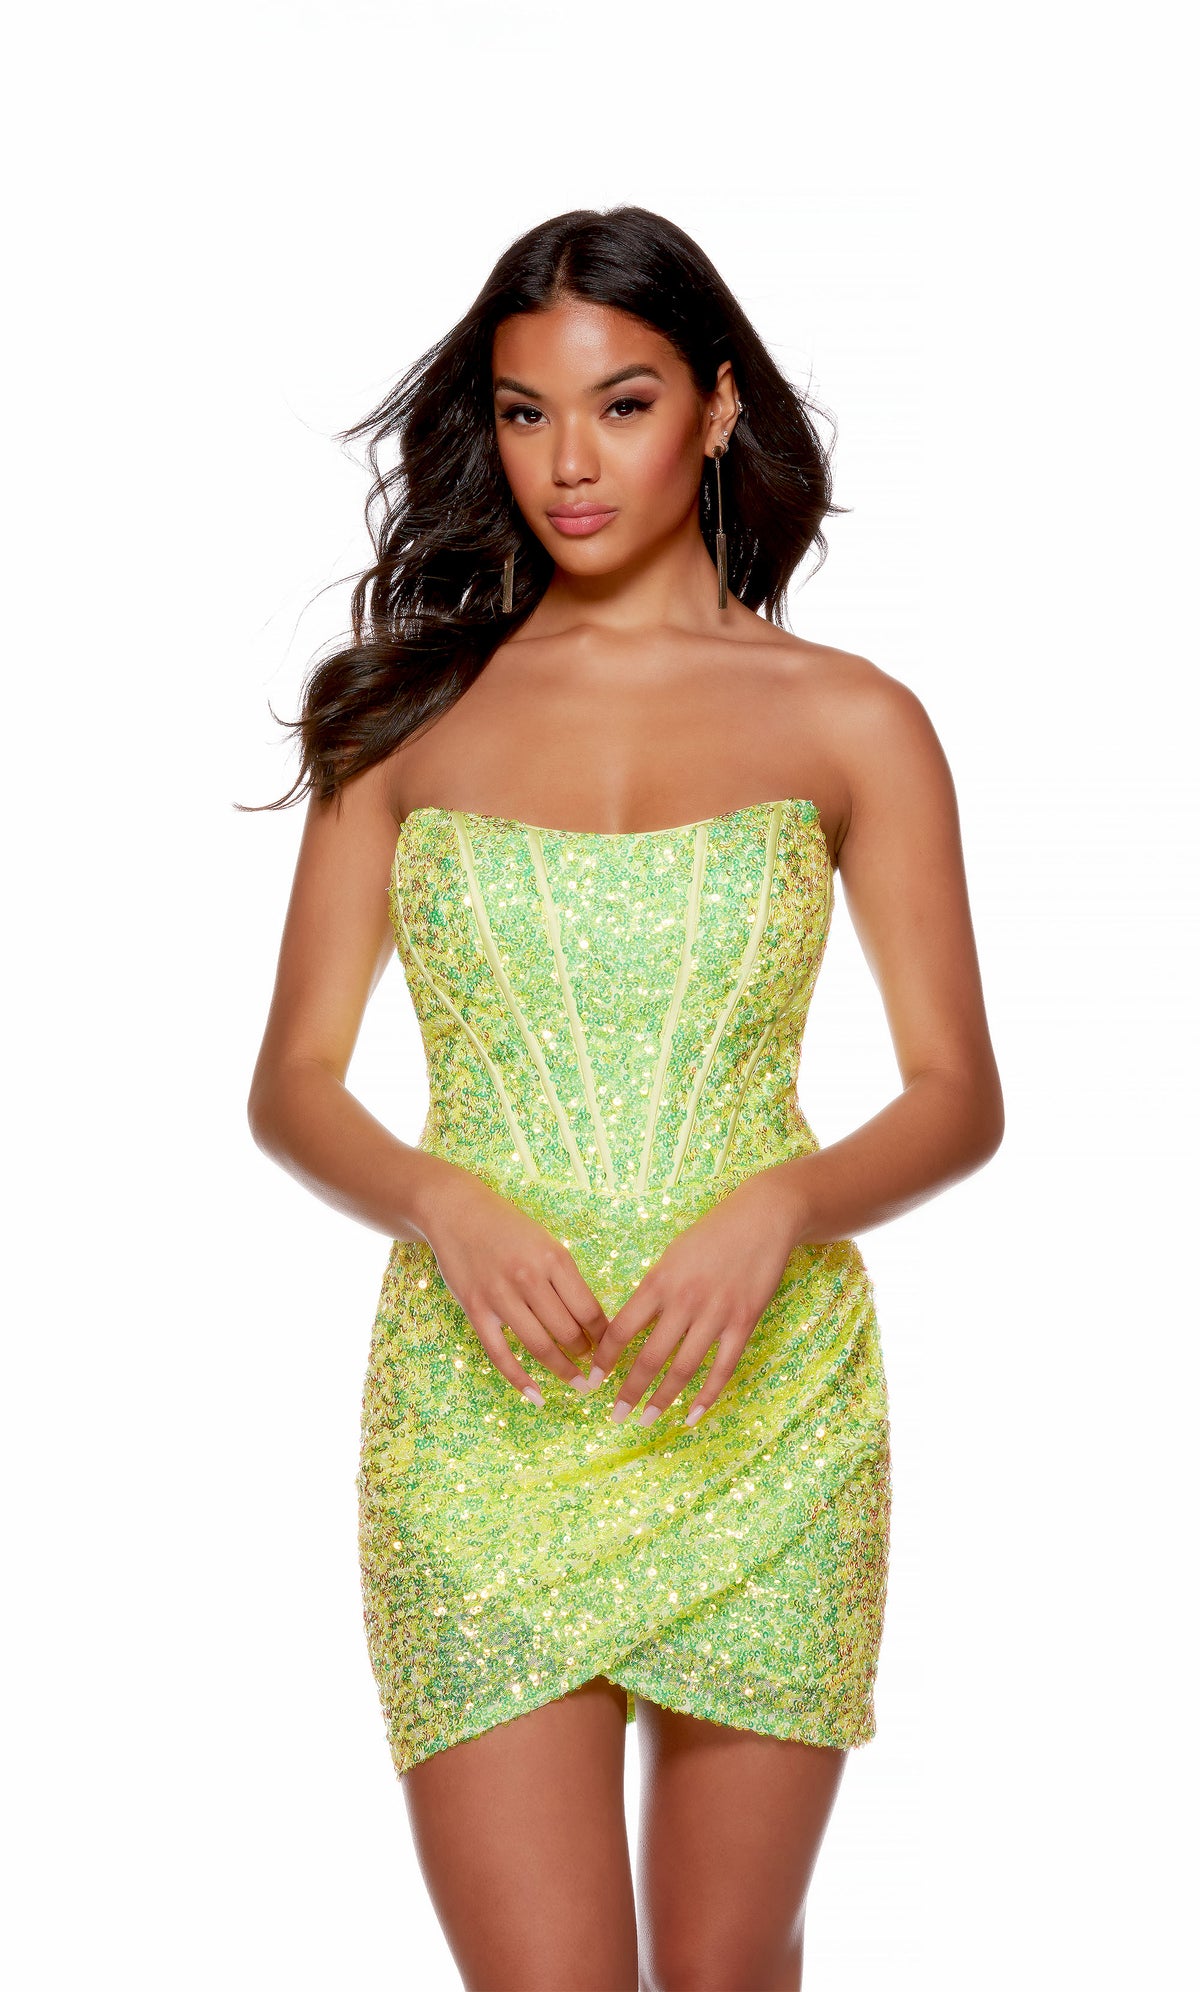 A glamorous neon green corset dress crafted from a sparkly, iridescent sequin fabric. The dress spotlights a chic strapless neckline, and a beautifully draped asymmetrical hemline.